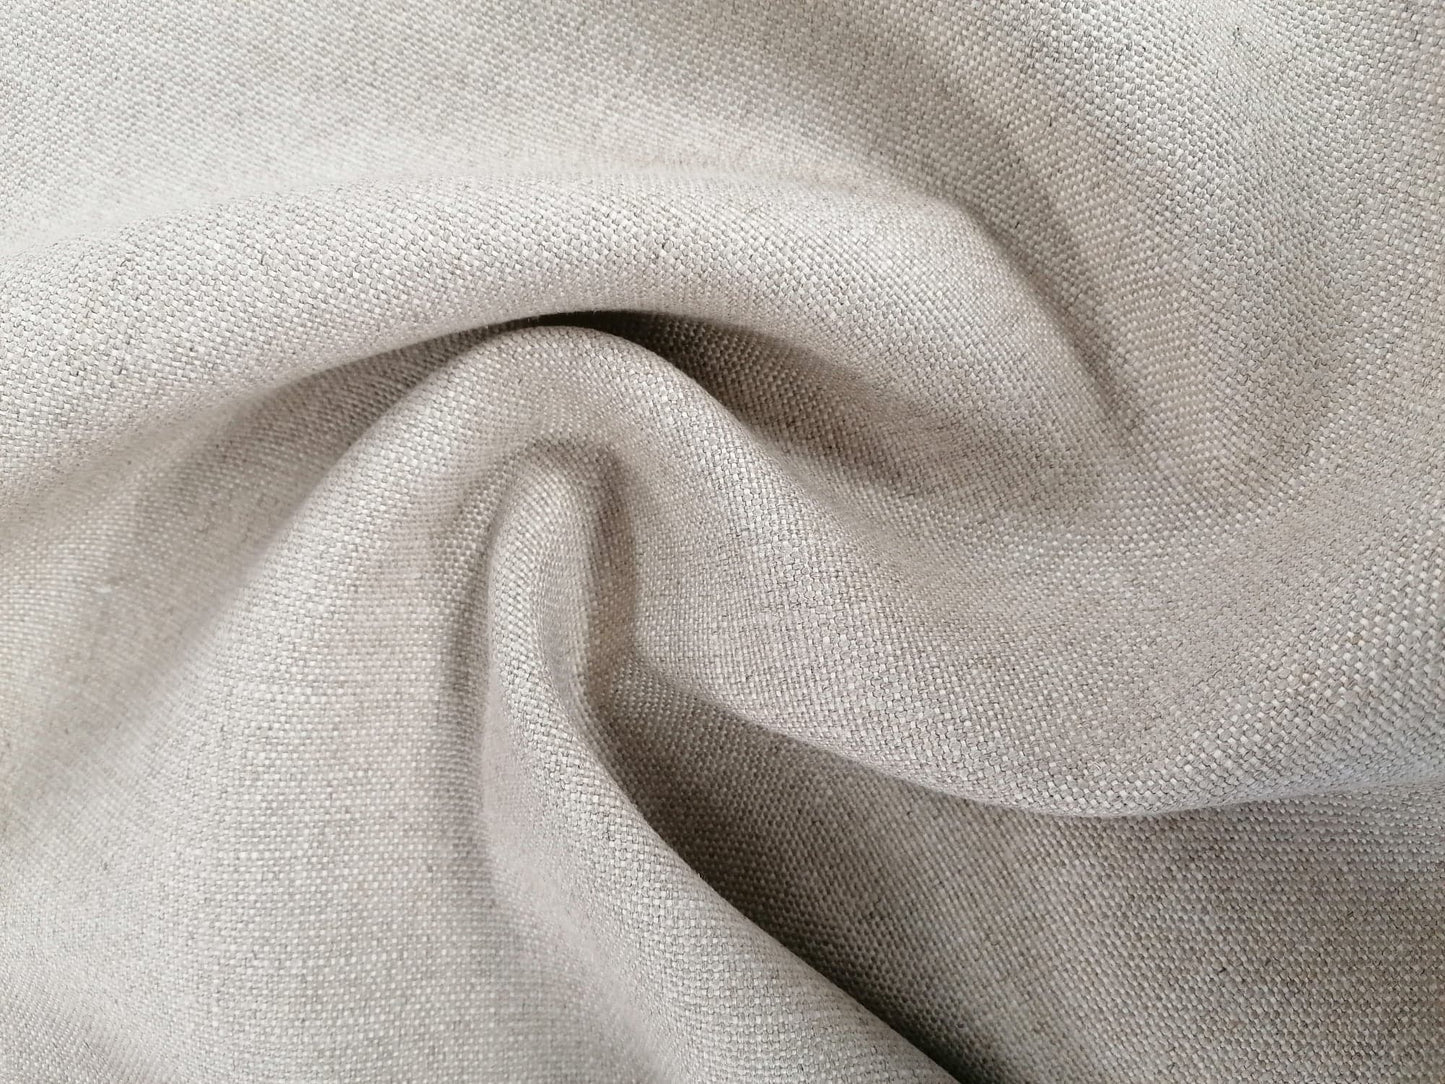 Very Heavy Linen - Biscuit - 56" Wide - Sold By the Metre